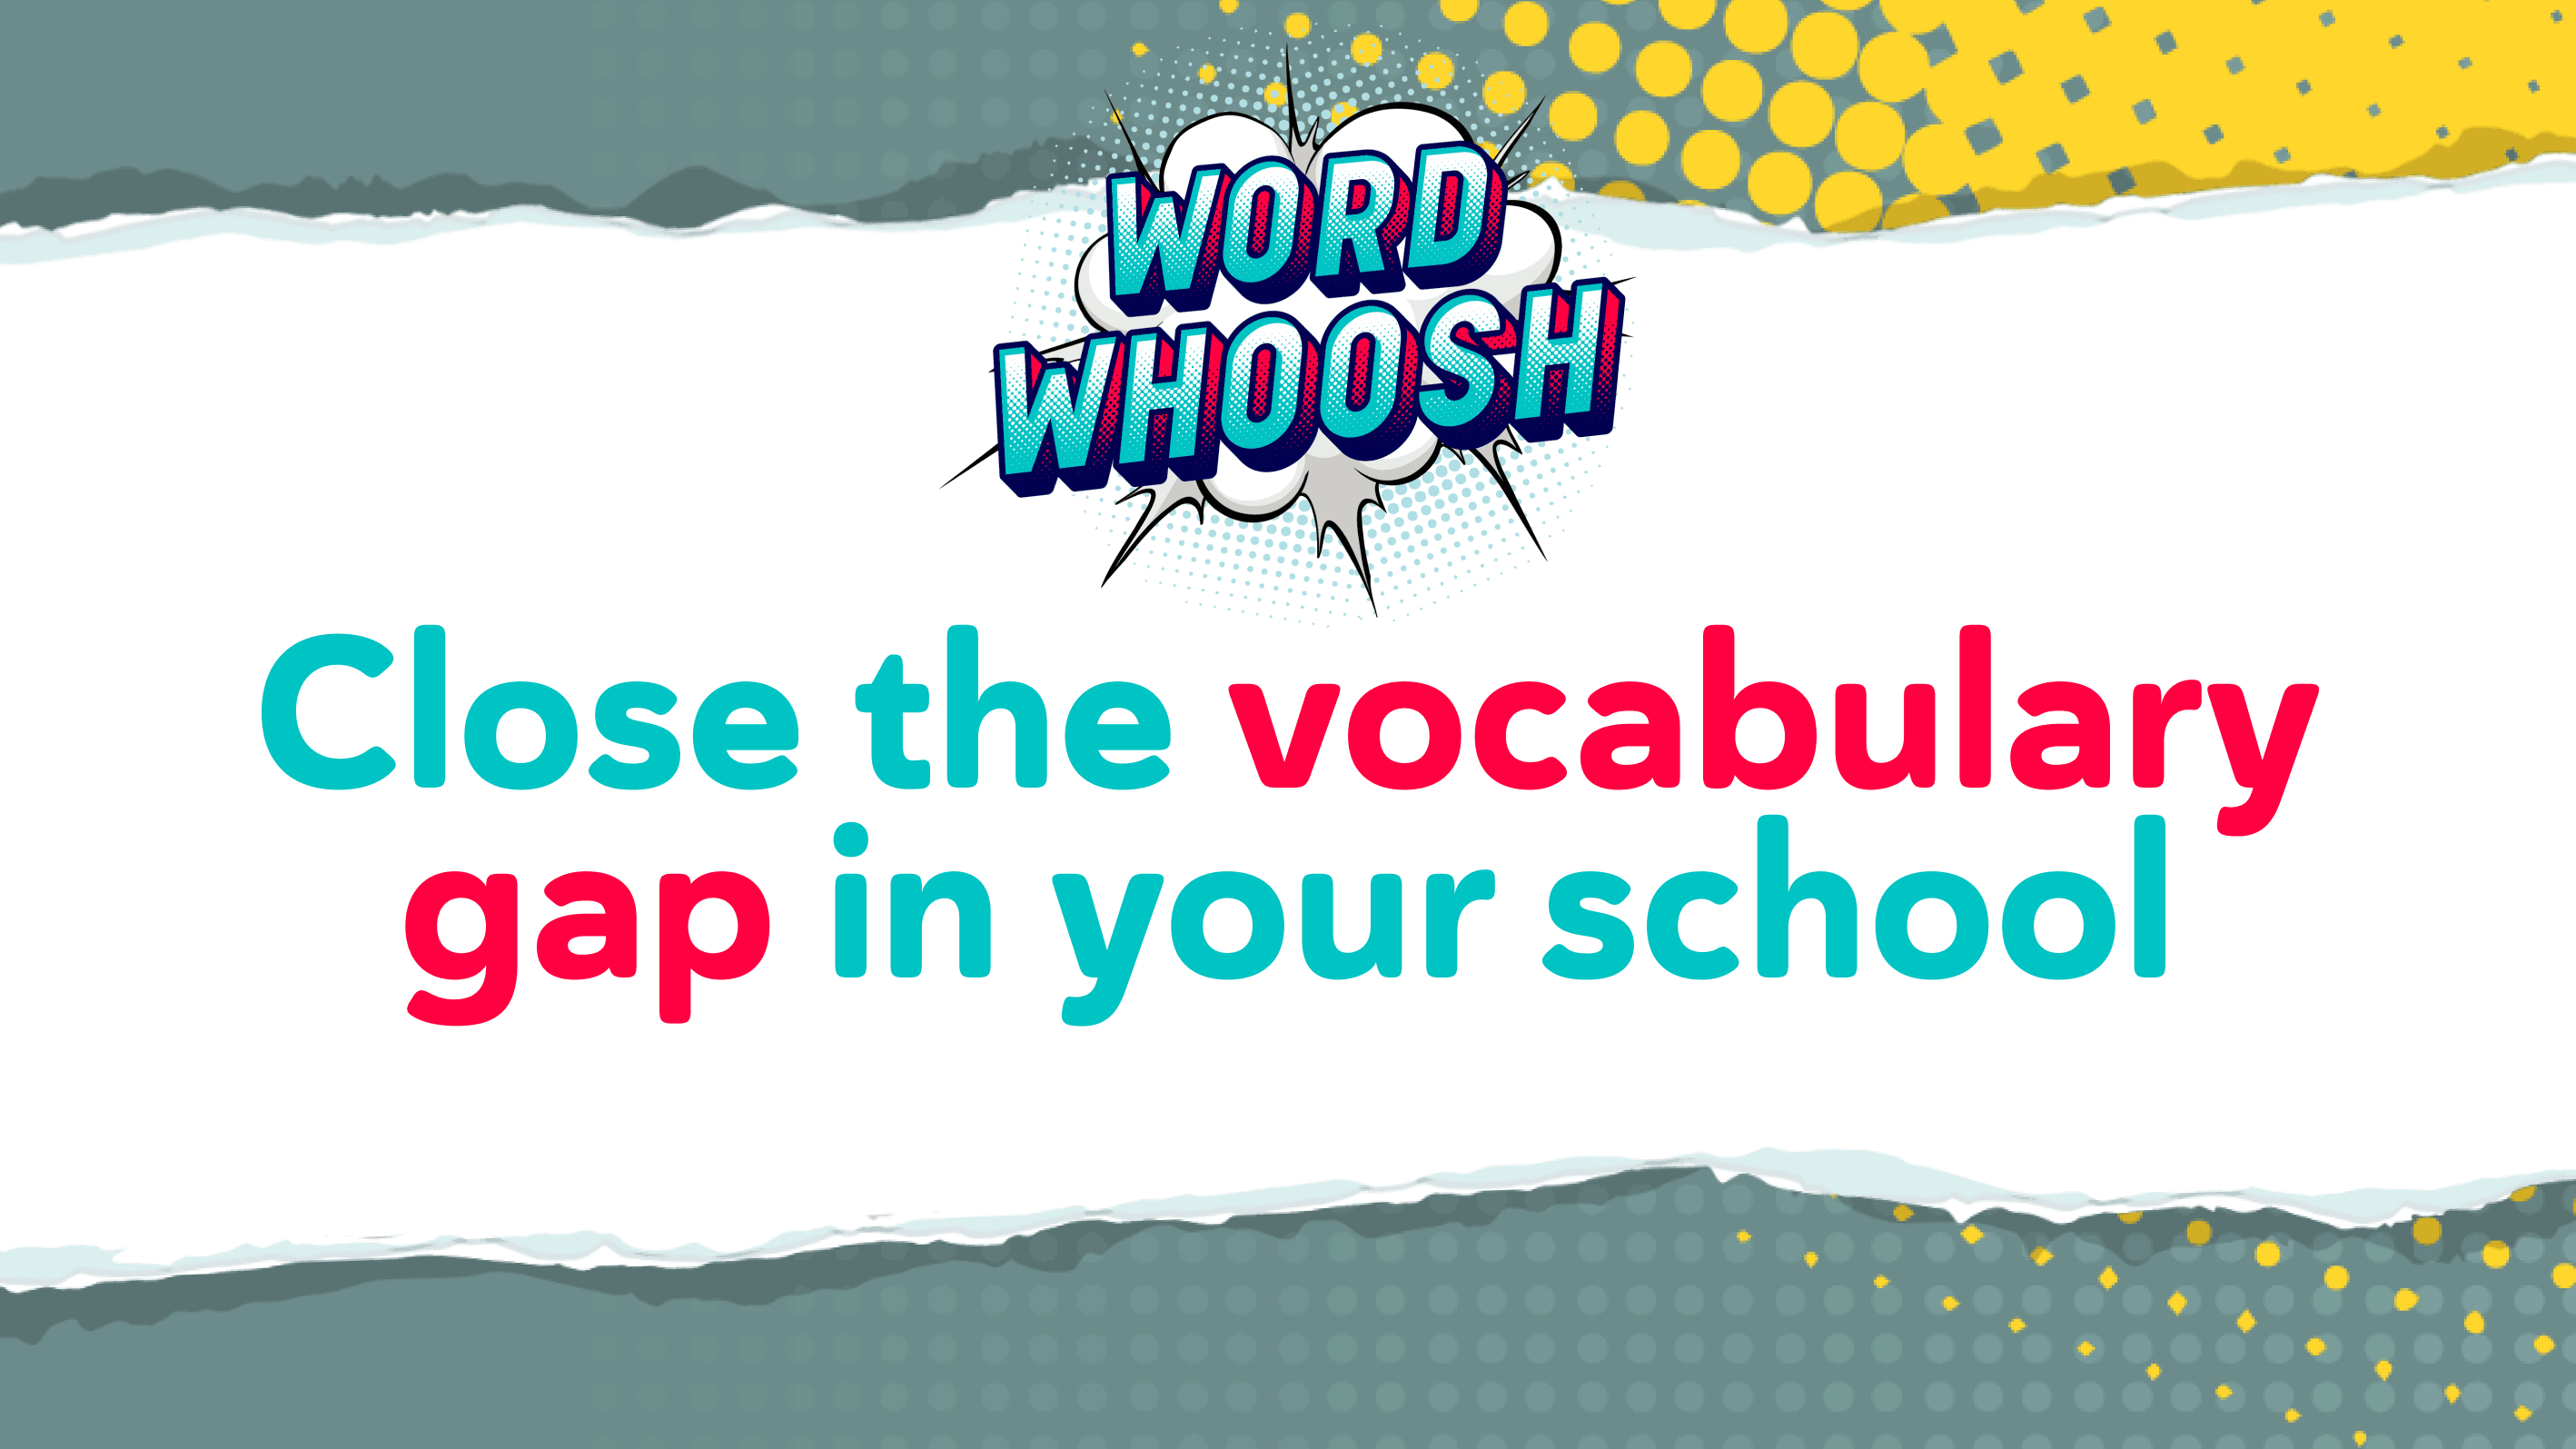 Main Image for What is included in Word Whoosh?